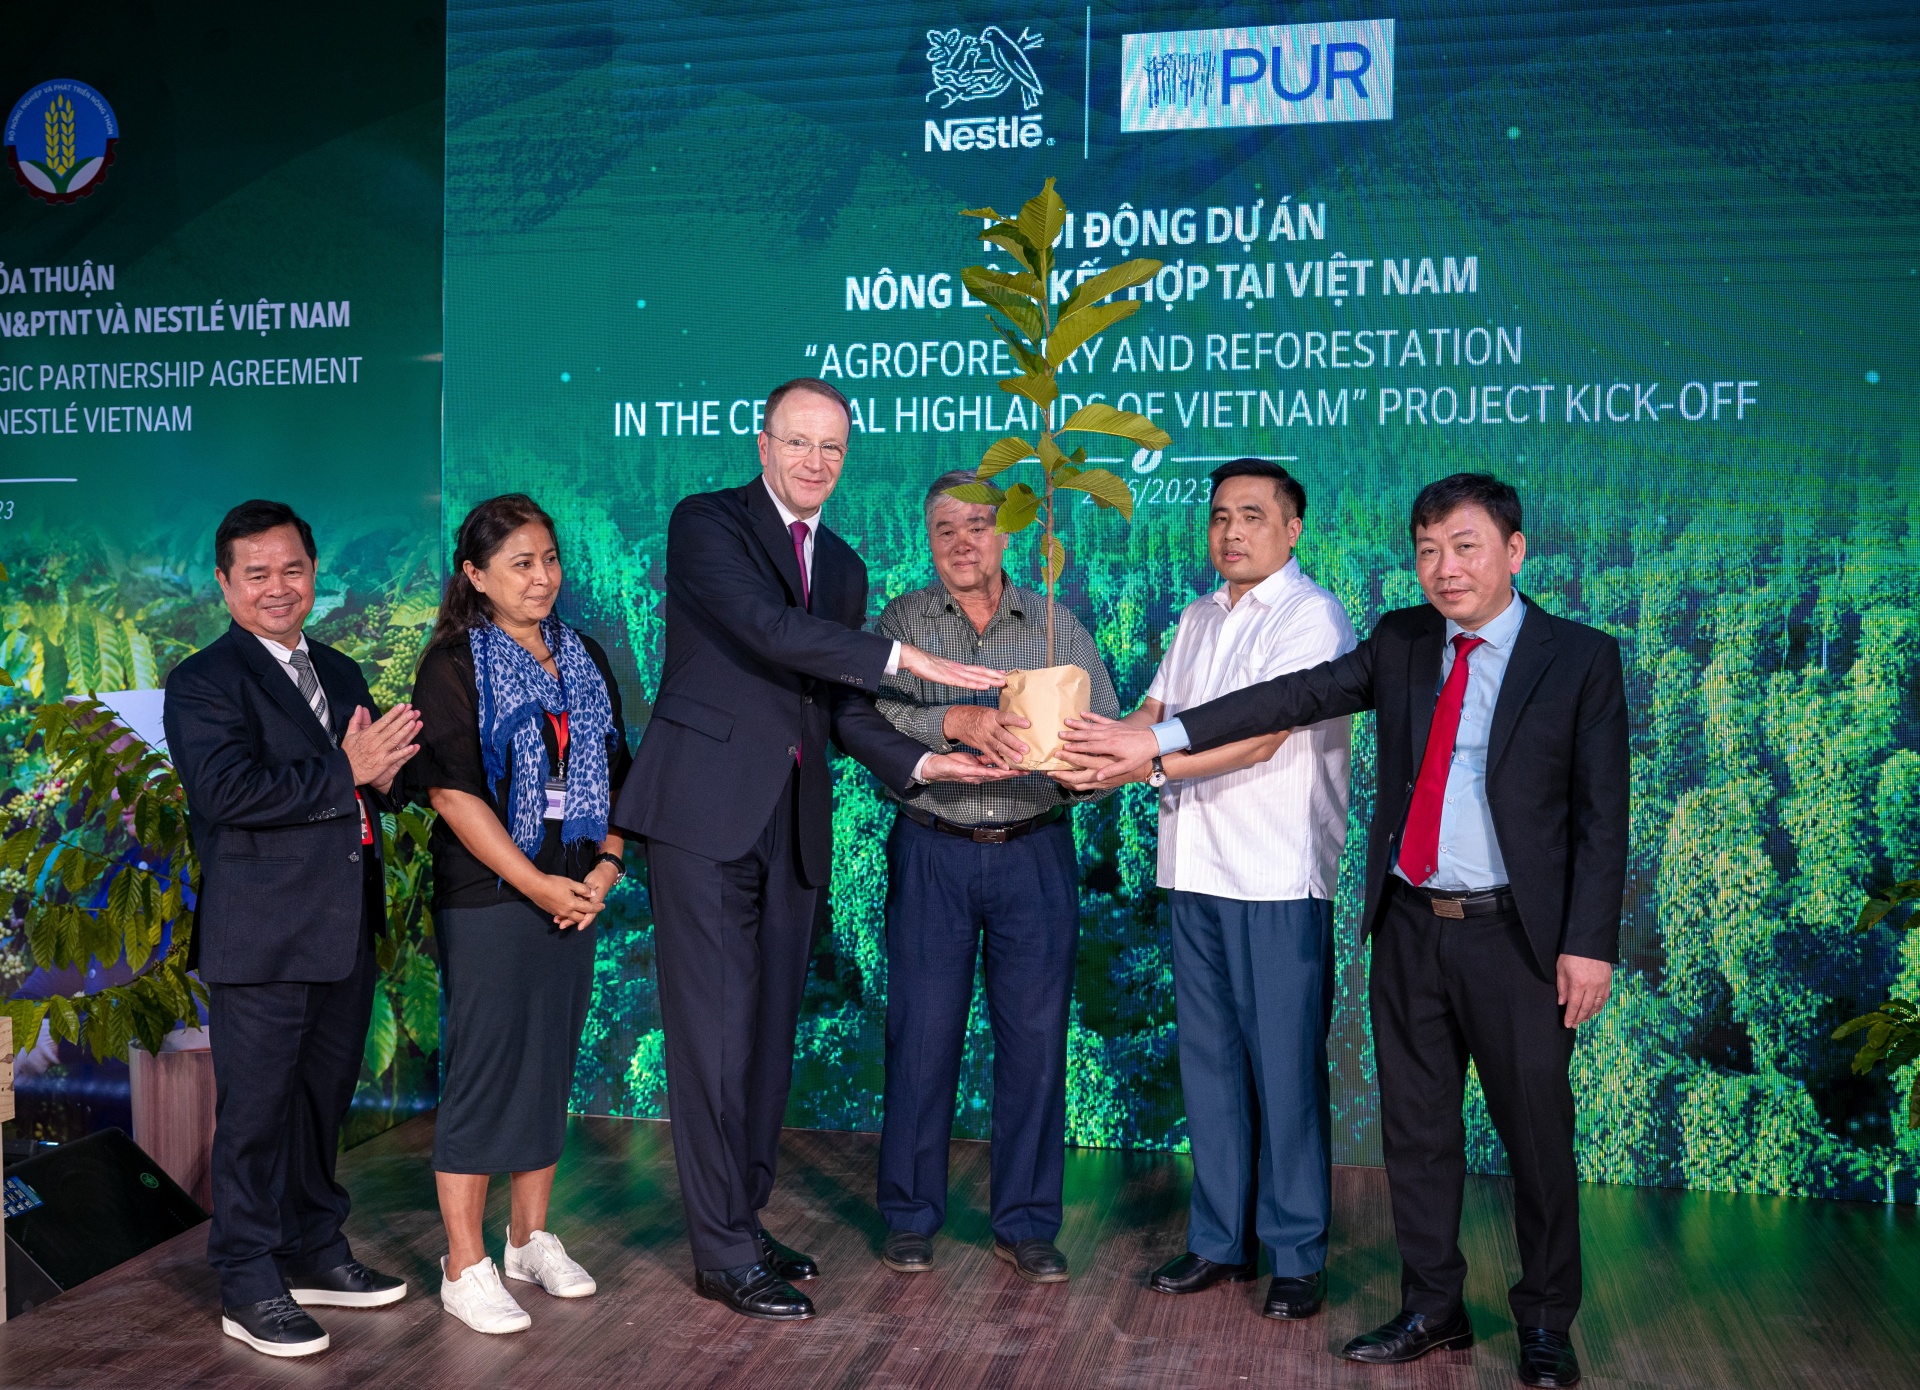 Nestlé Vietnam strengthens collaborations in sustainable agriculture